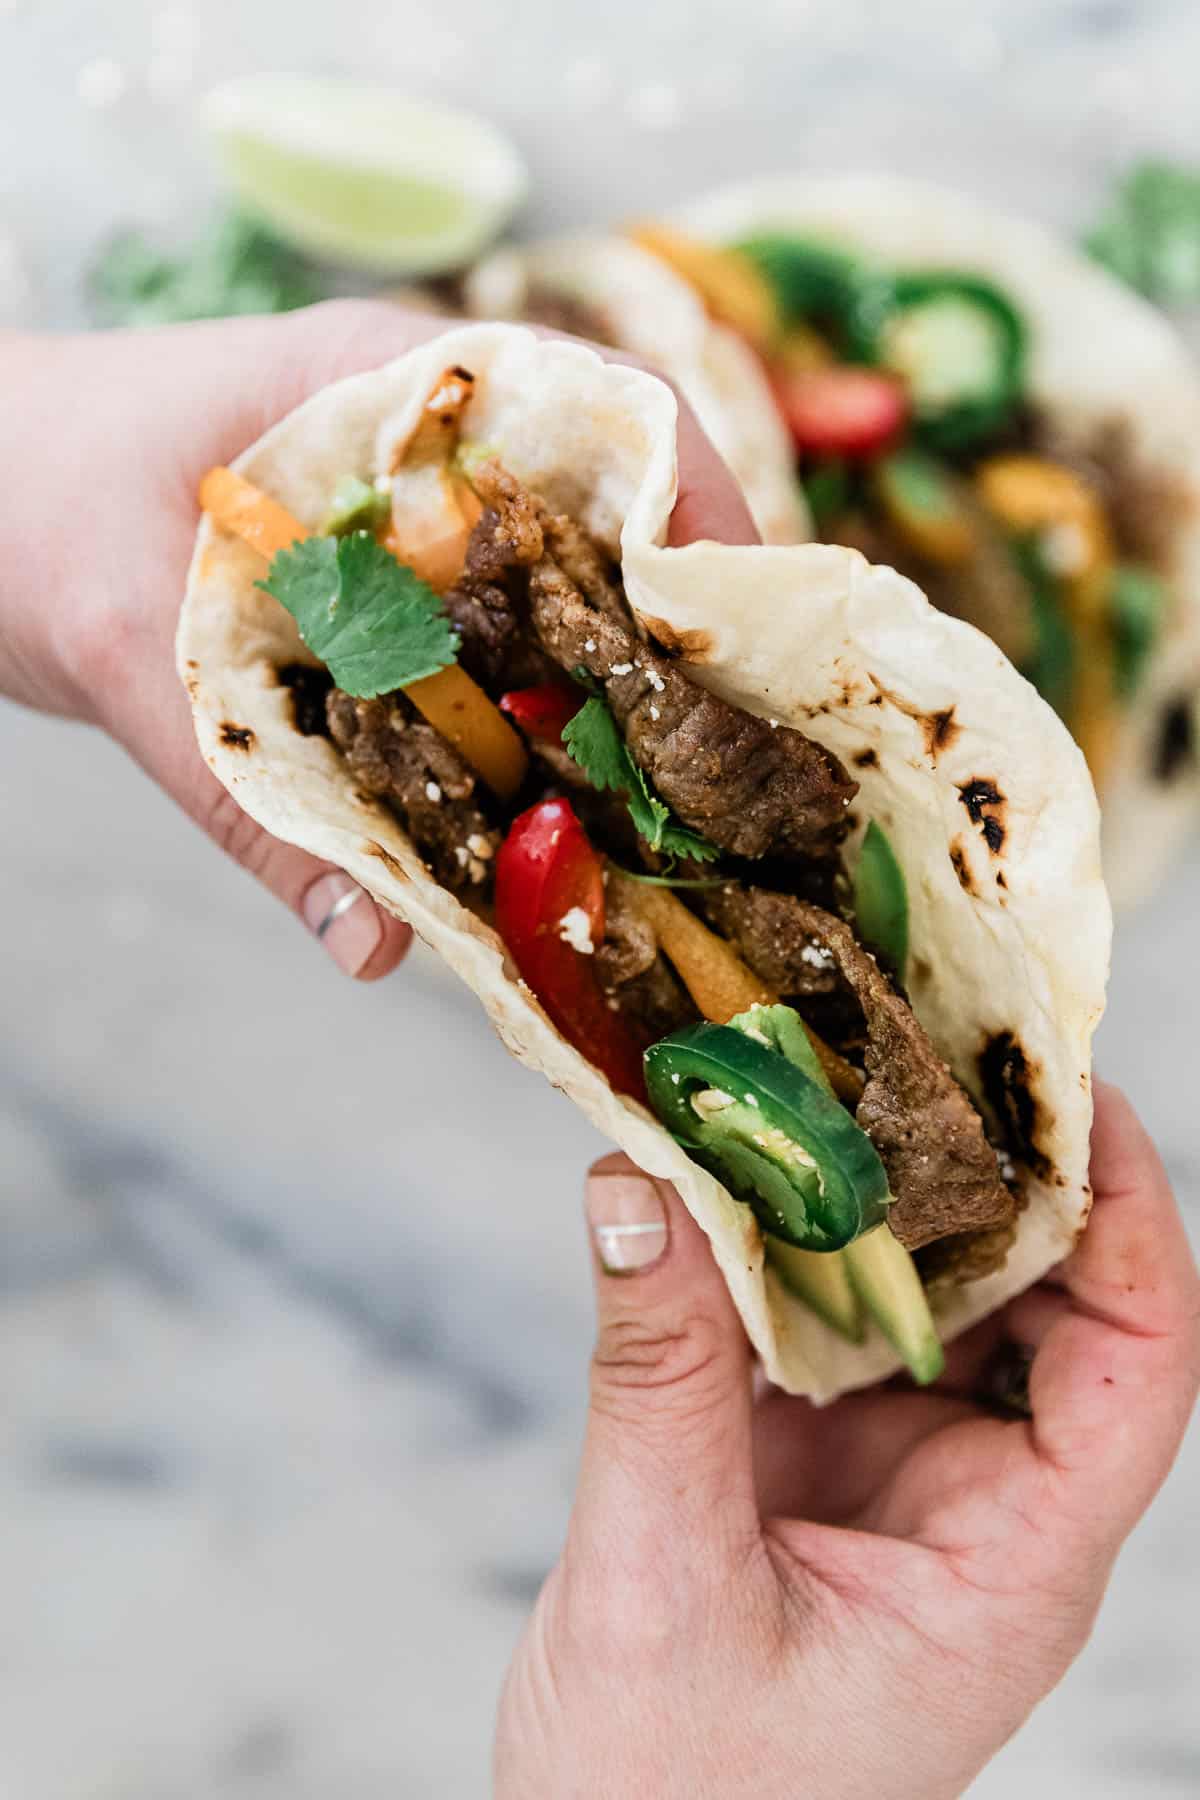 A taco made with fajita mix being held.